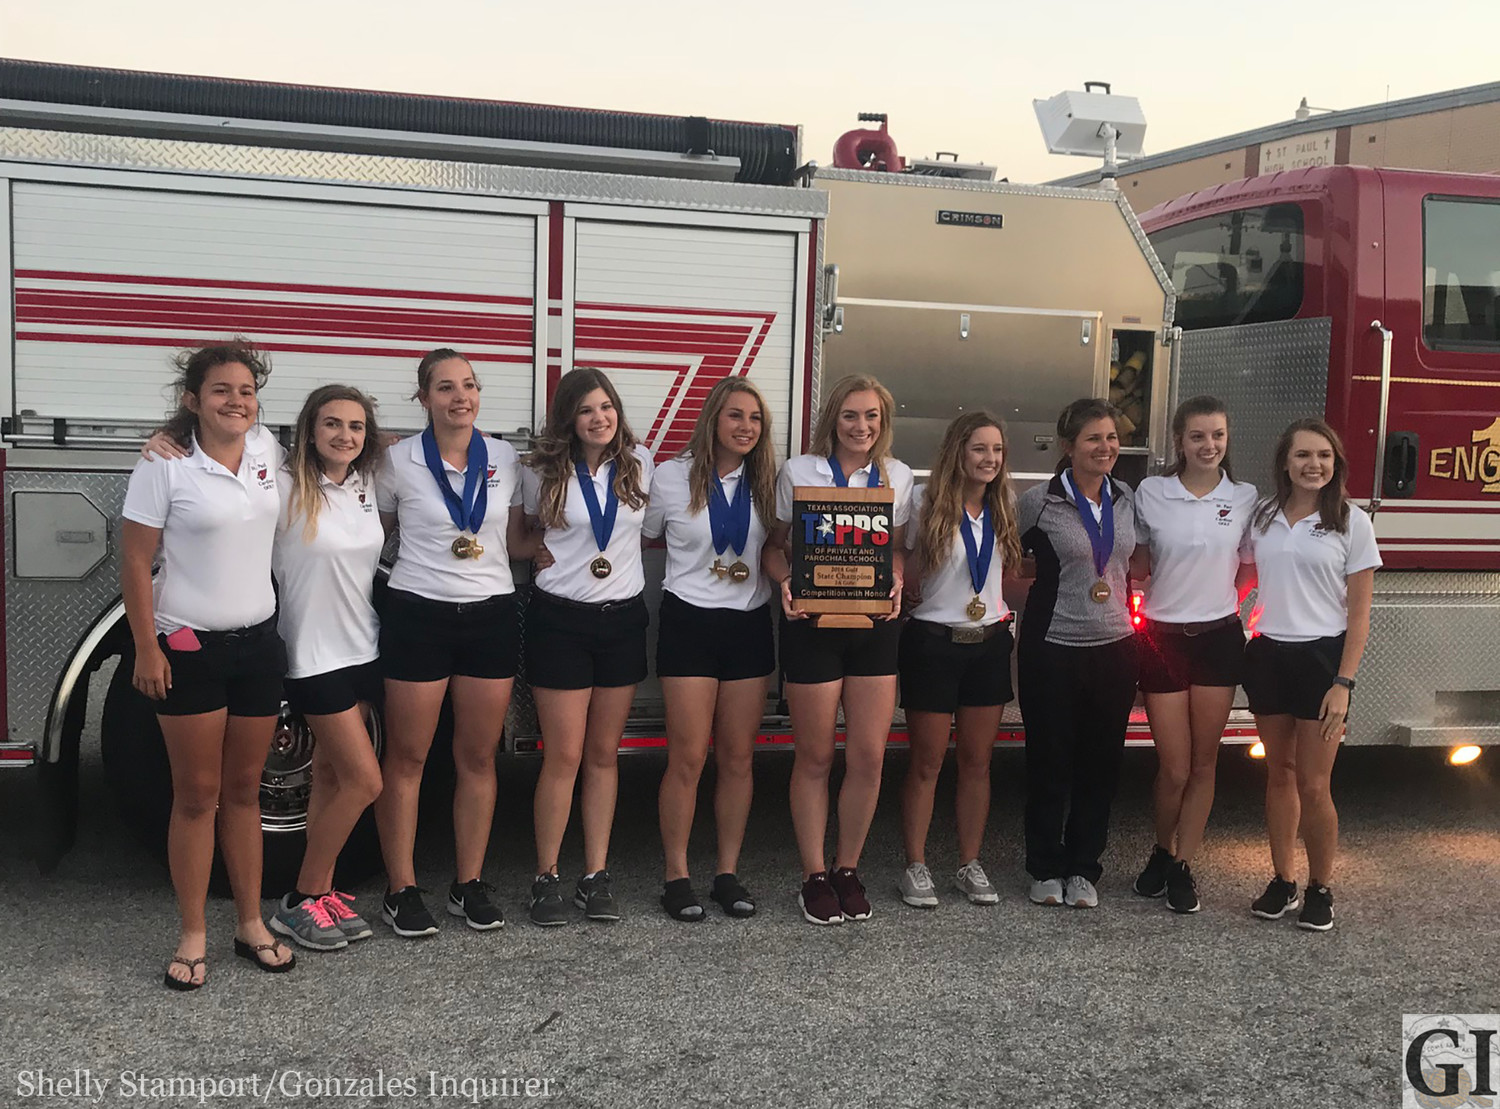 Shiner celebrated the Lady Cardinals state championship Tuesday night with the fire truck carrying St. Paul’s girls golf team drove through town. The Lady Cardinals beat the second place team by a whopping 43 strokes.